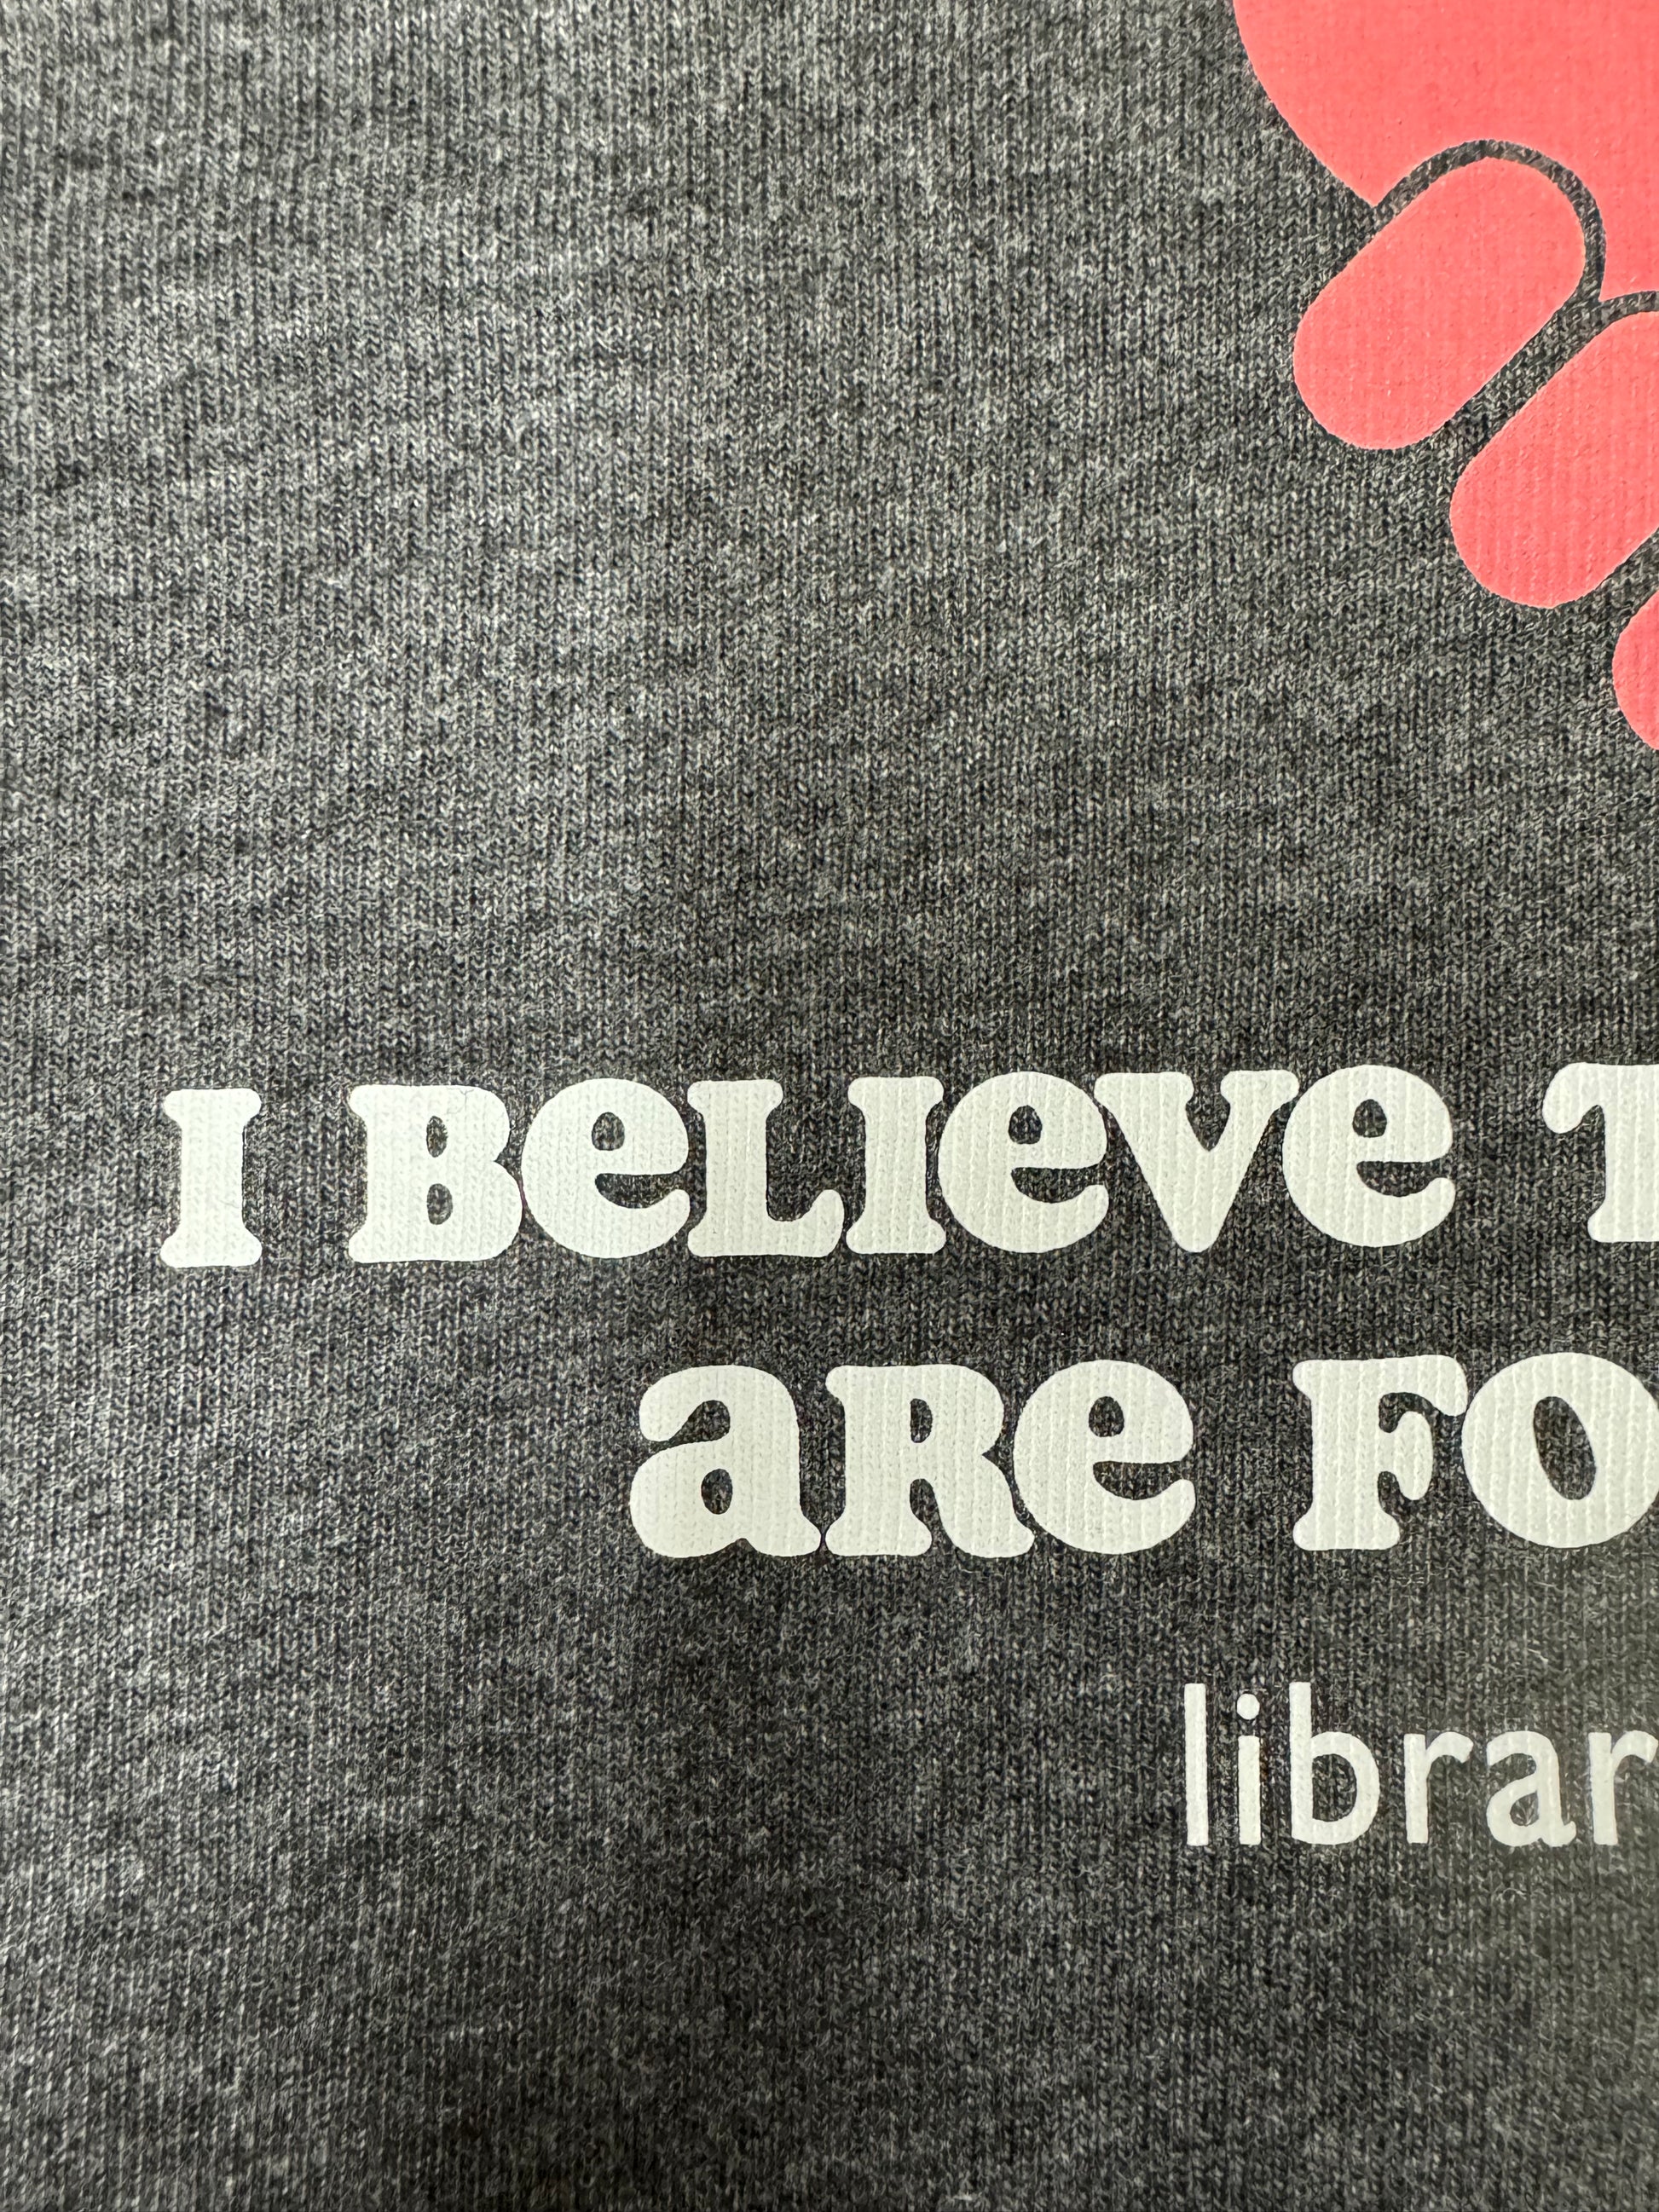 Official That Librarian Sweatshirt - Cozy and Stylish for Book Lovers